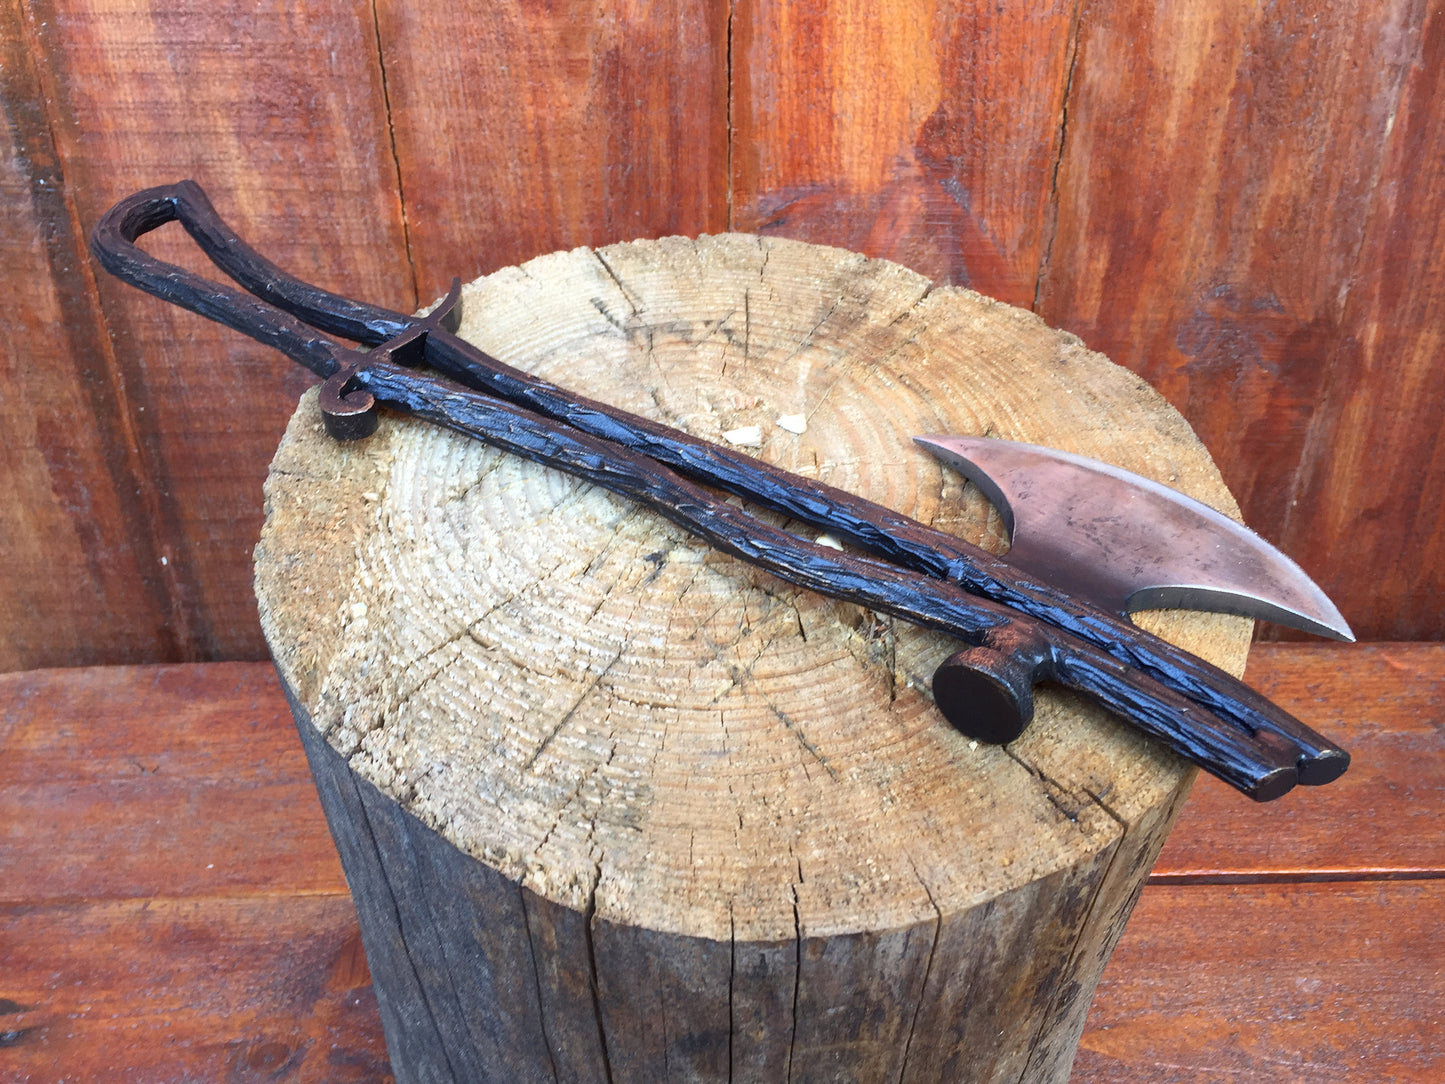 Viking axe, tomahawk, hatchet, gifts for mens, medieval tools, medieval art, medieval armor, axe birthday, axe charm, axe fathers day, ax